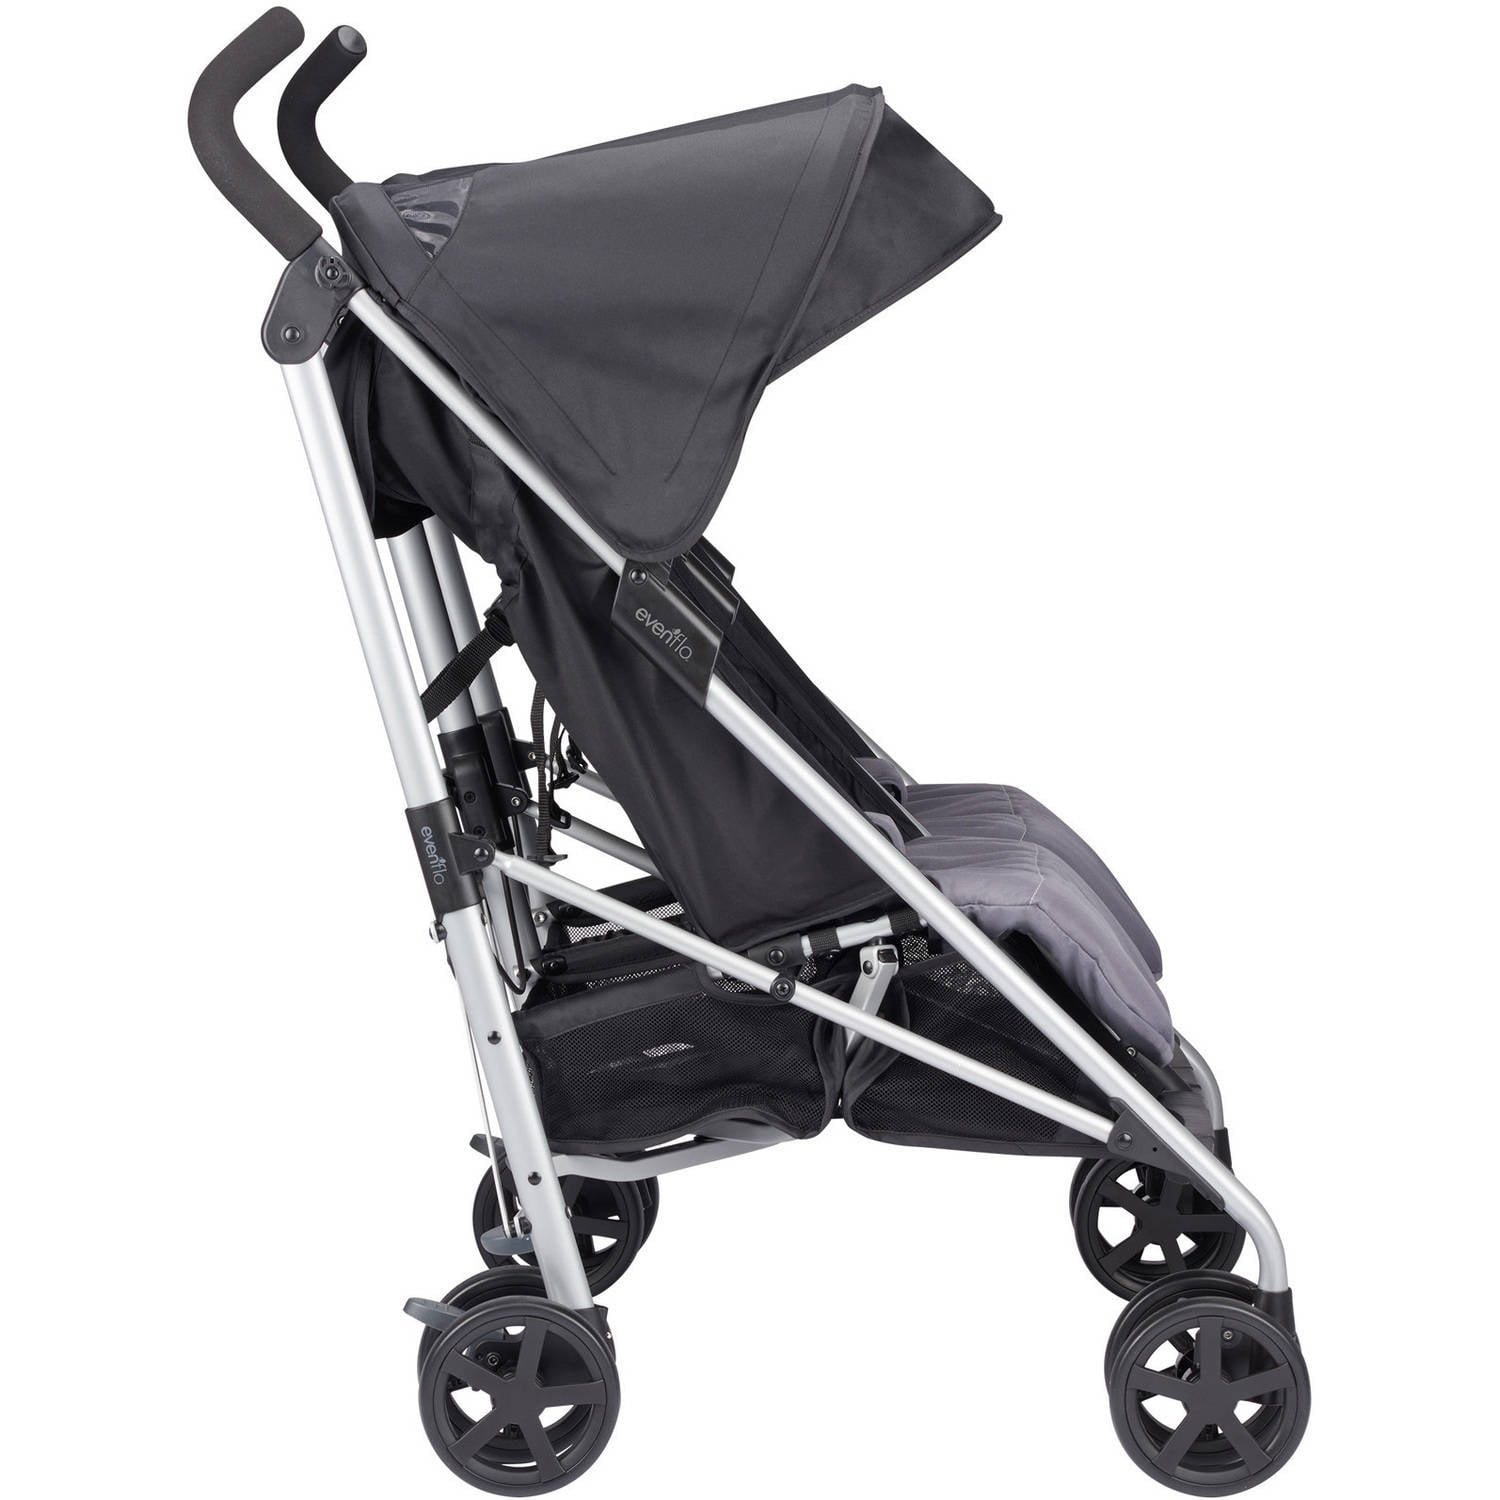 most compact fold stroller